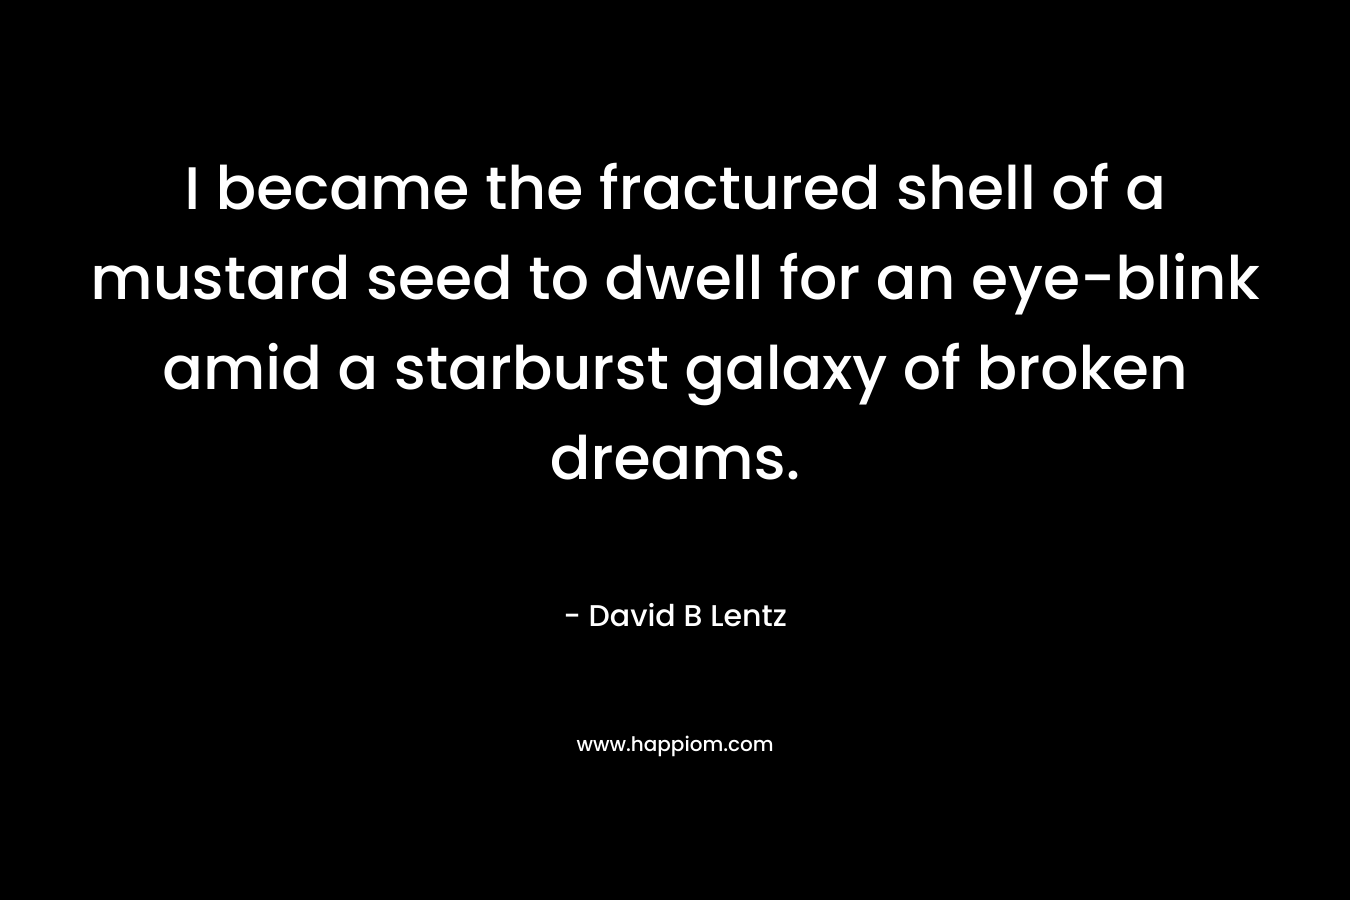 I became the fractured shell of a mustard seed to dwell for an eye-blink amid a starburst galaxy of broken dreams.